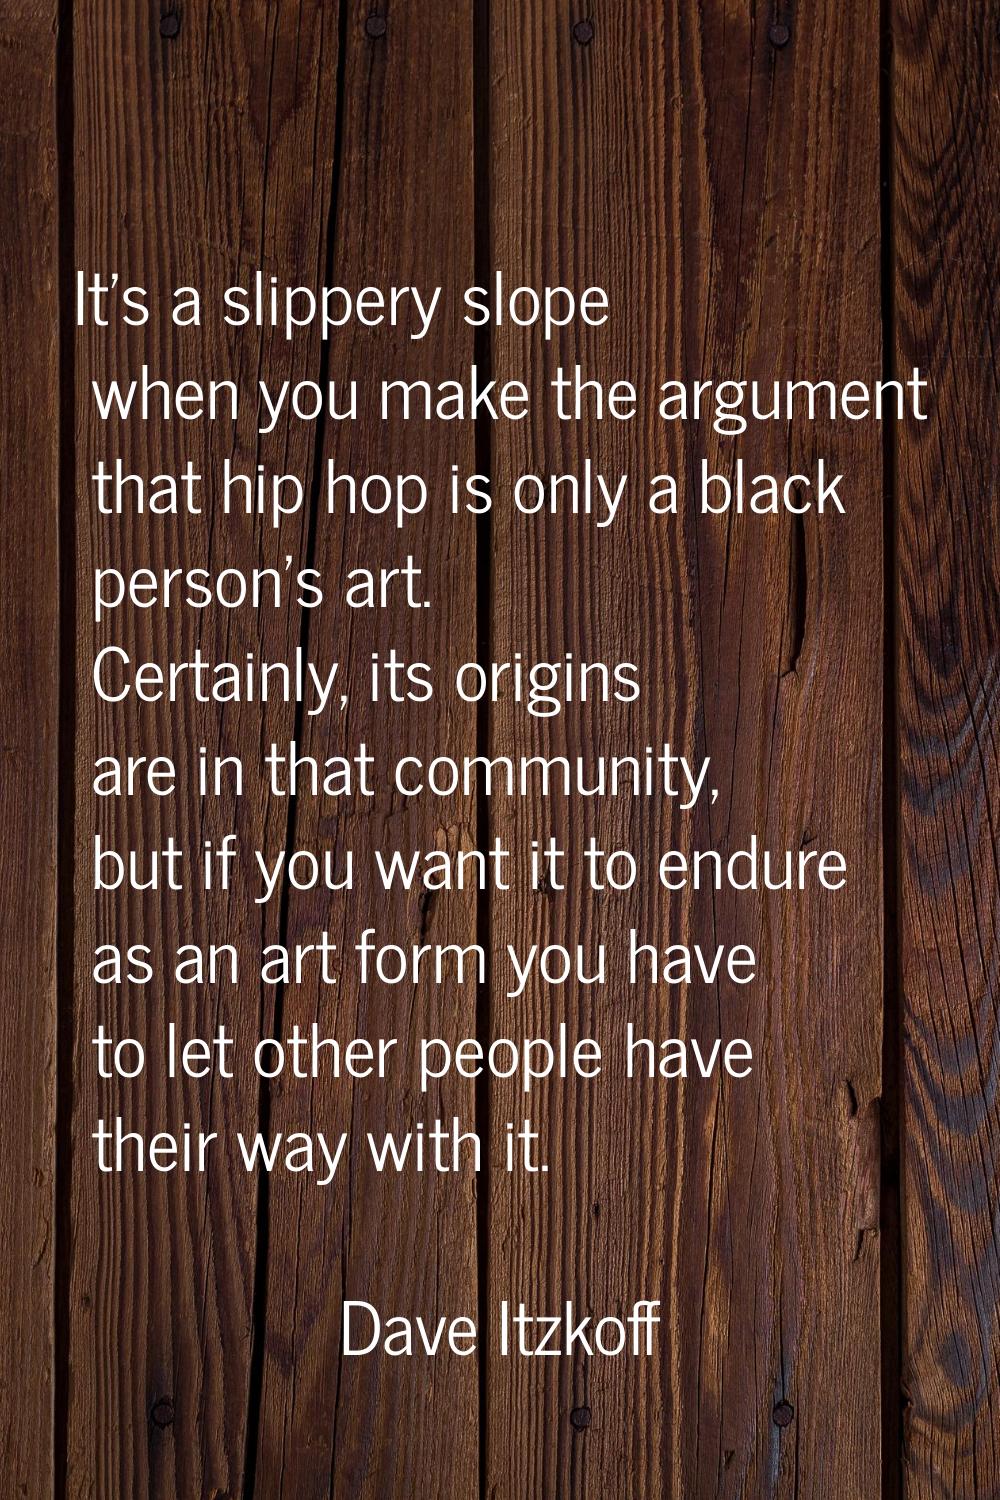 It's a slippery slope when you make the argument that hip hop is only a black person's art. Certain